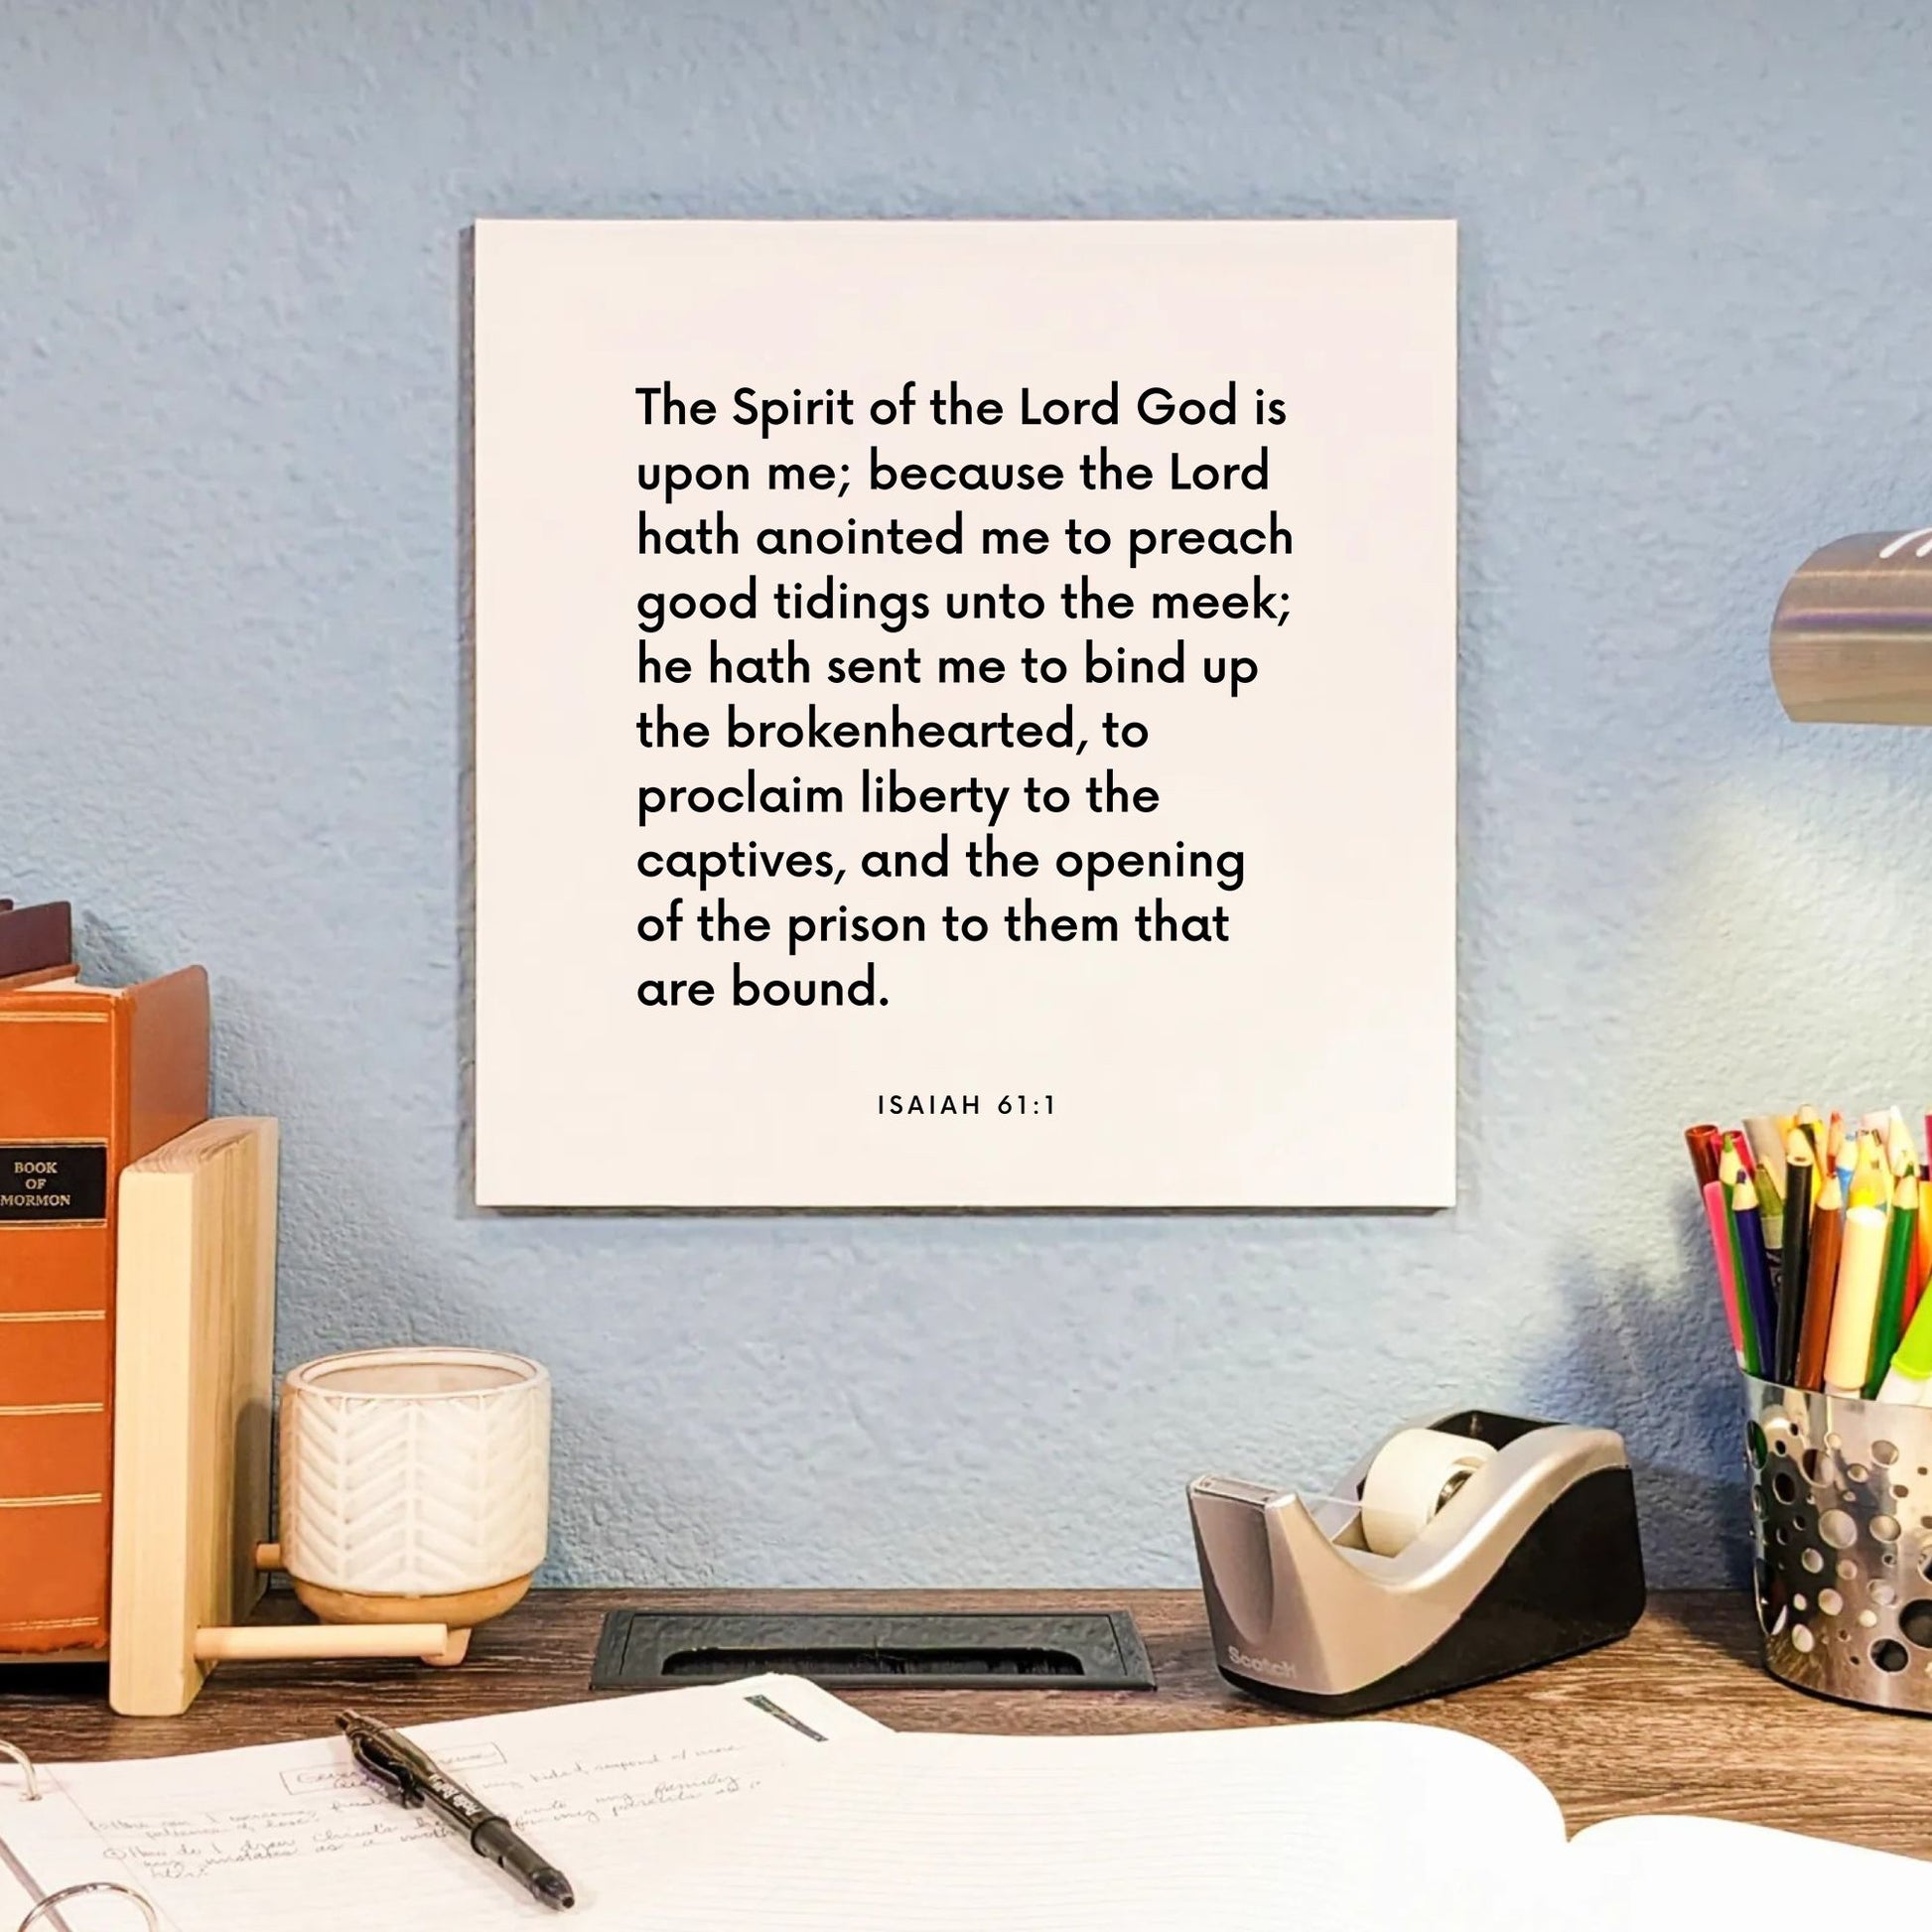 Desk mouting of the scripture tile for Isaiah 61:1 - "He hath sent me to bind up the brokenhearted"